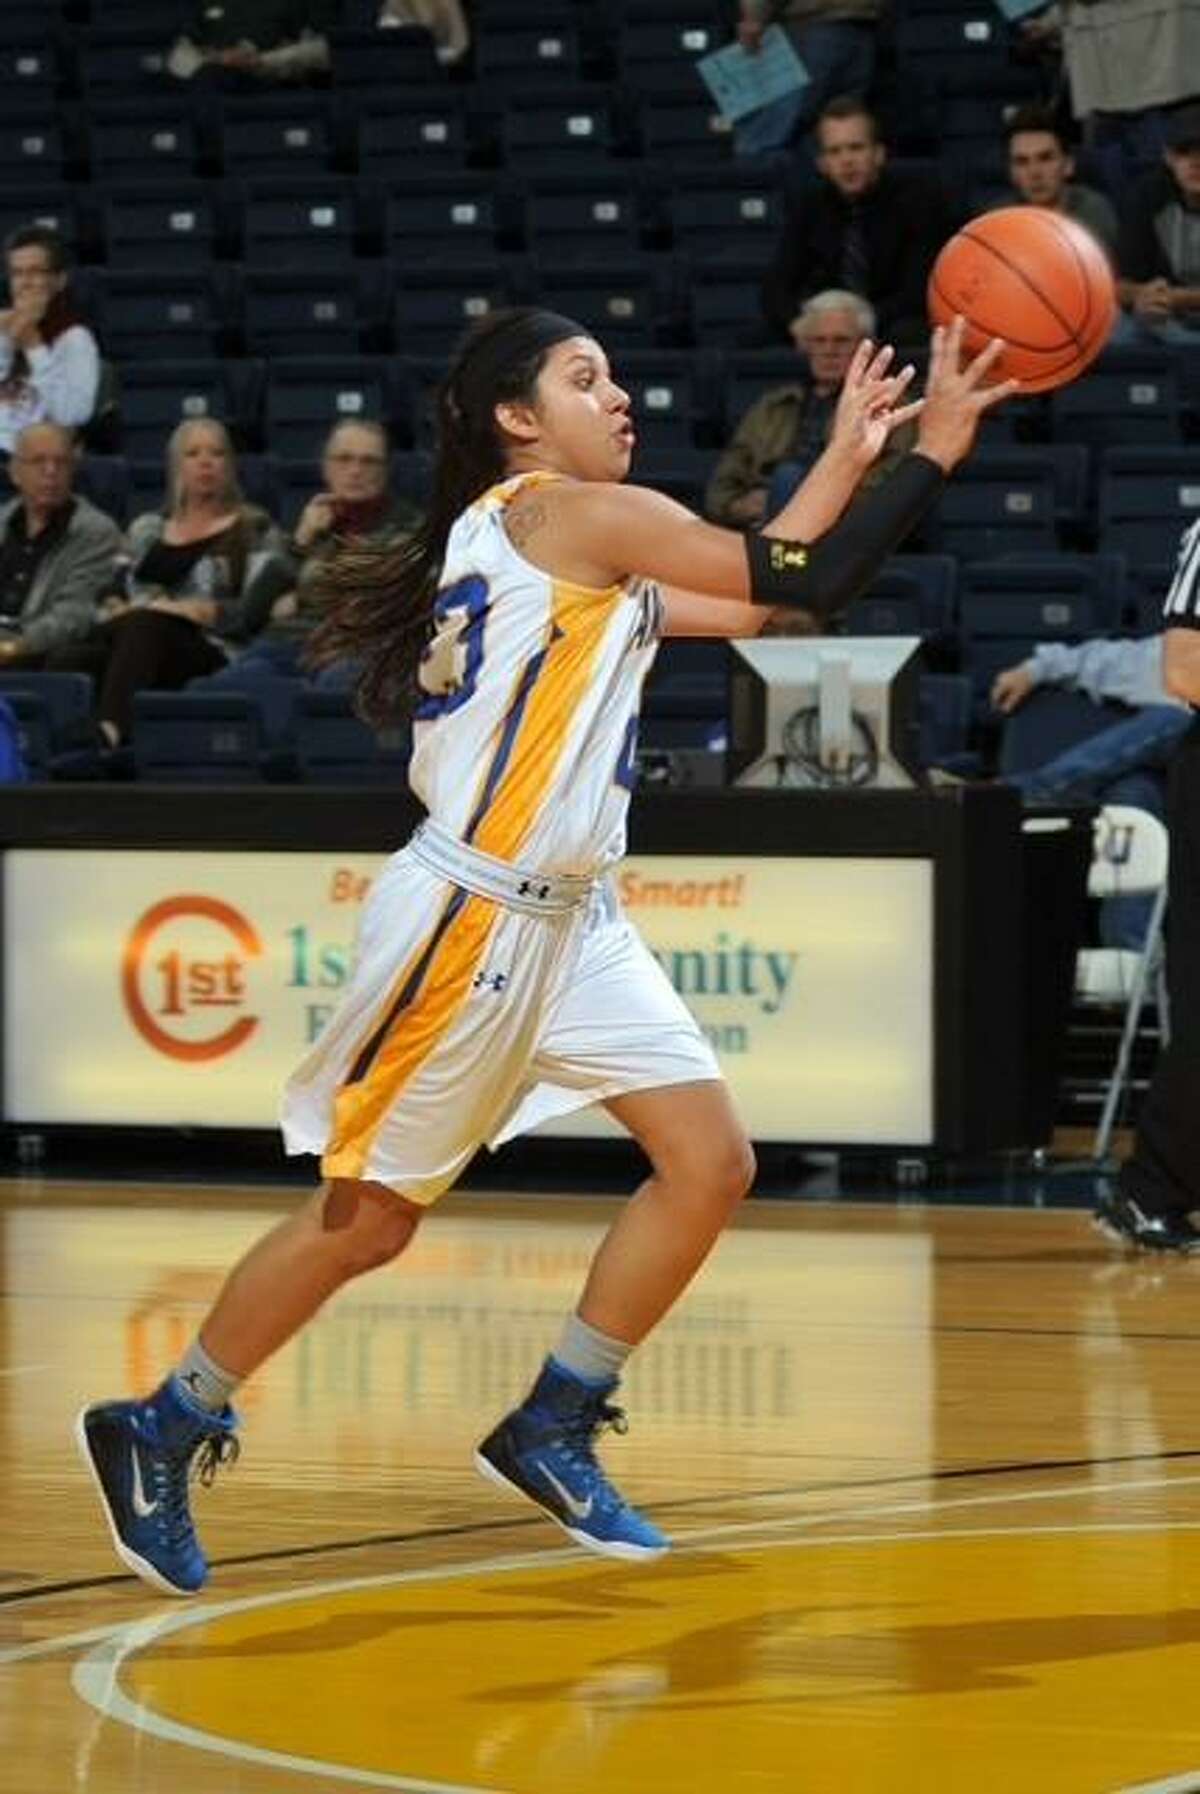 Former United South girls' basketball player Elaine Herrera played for five high school and college teams in six years, finishing off her senior year collegiately with an NCCAA Division II championship with Arlington Baptist in 2015-16.